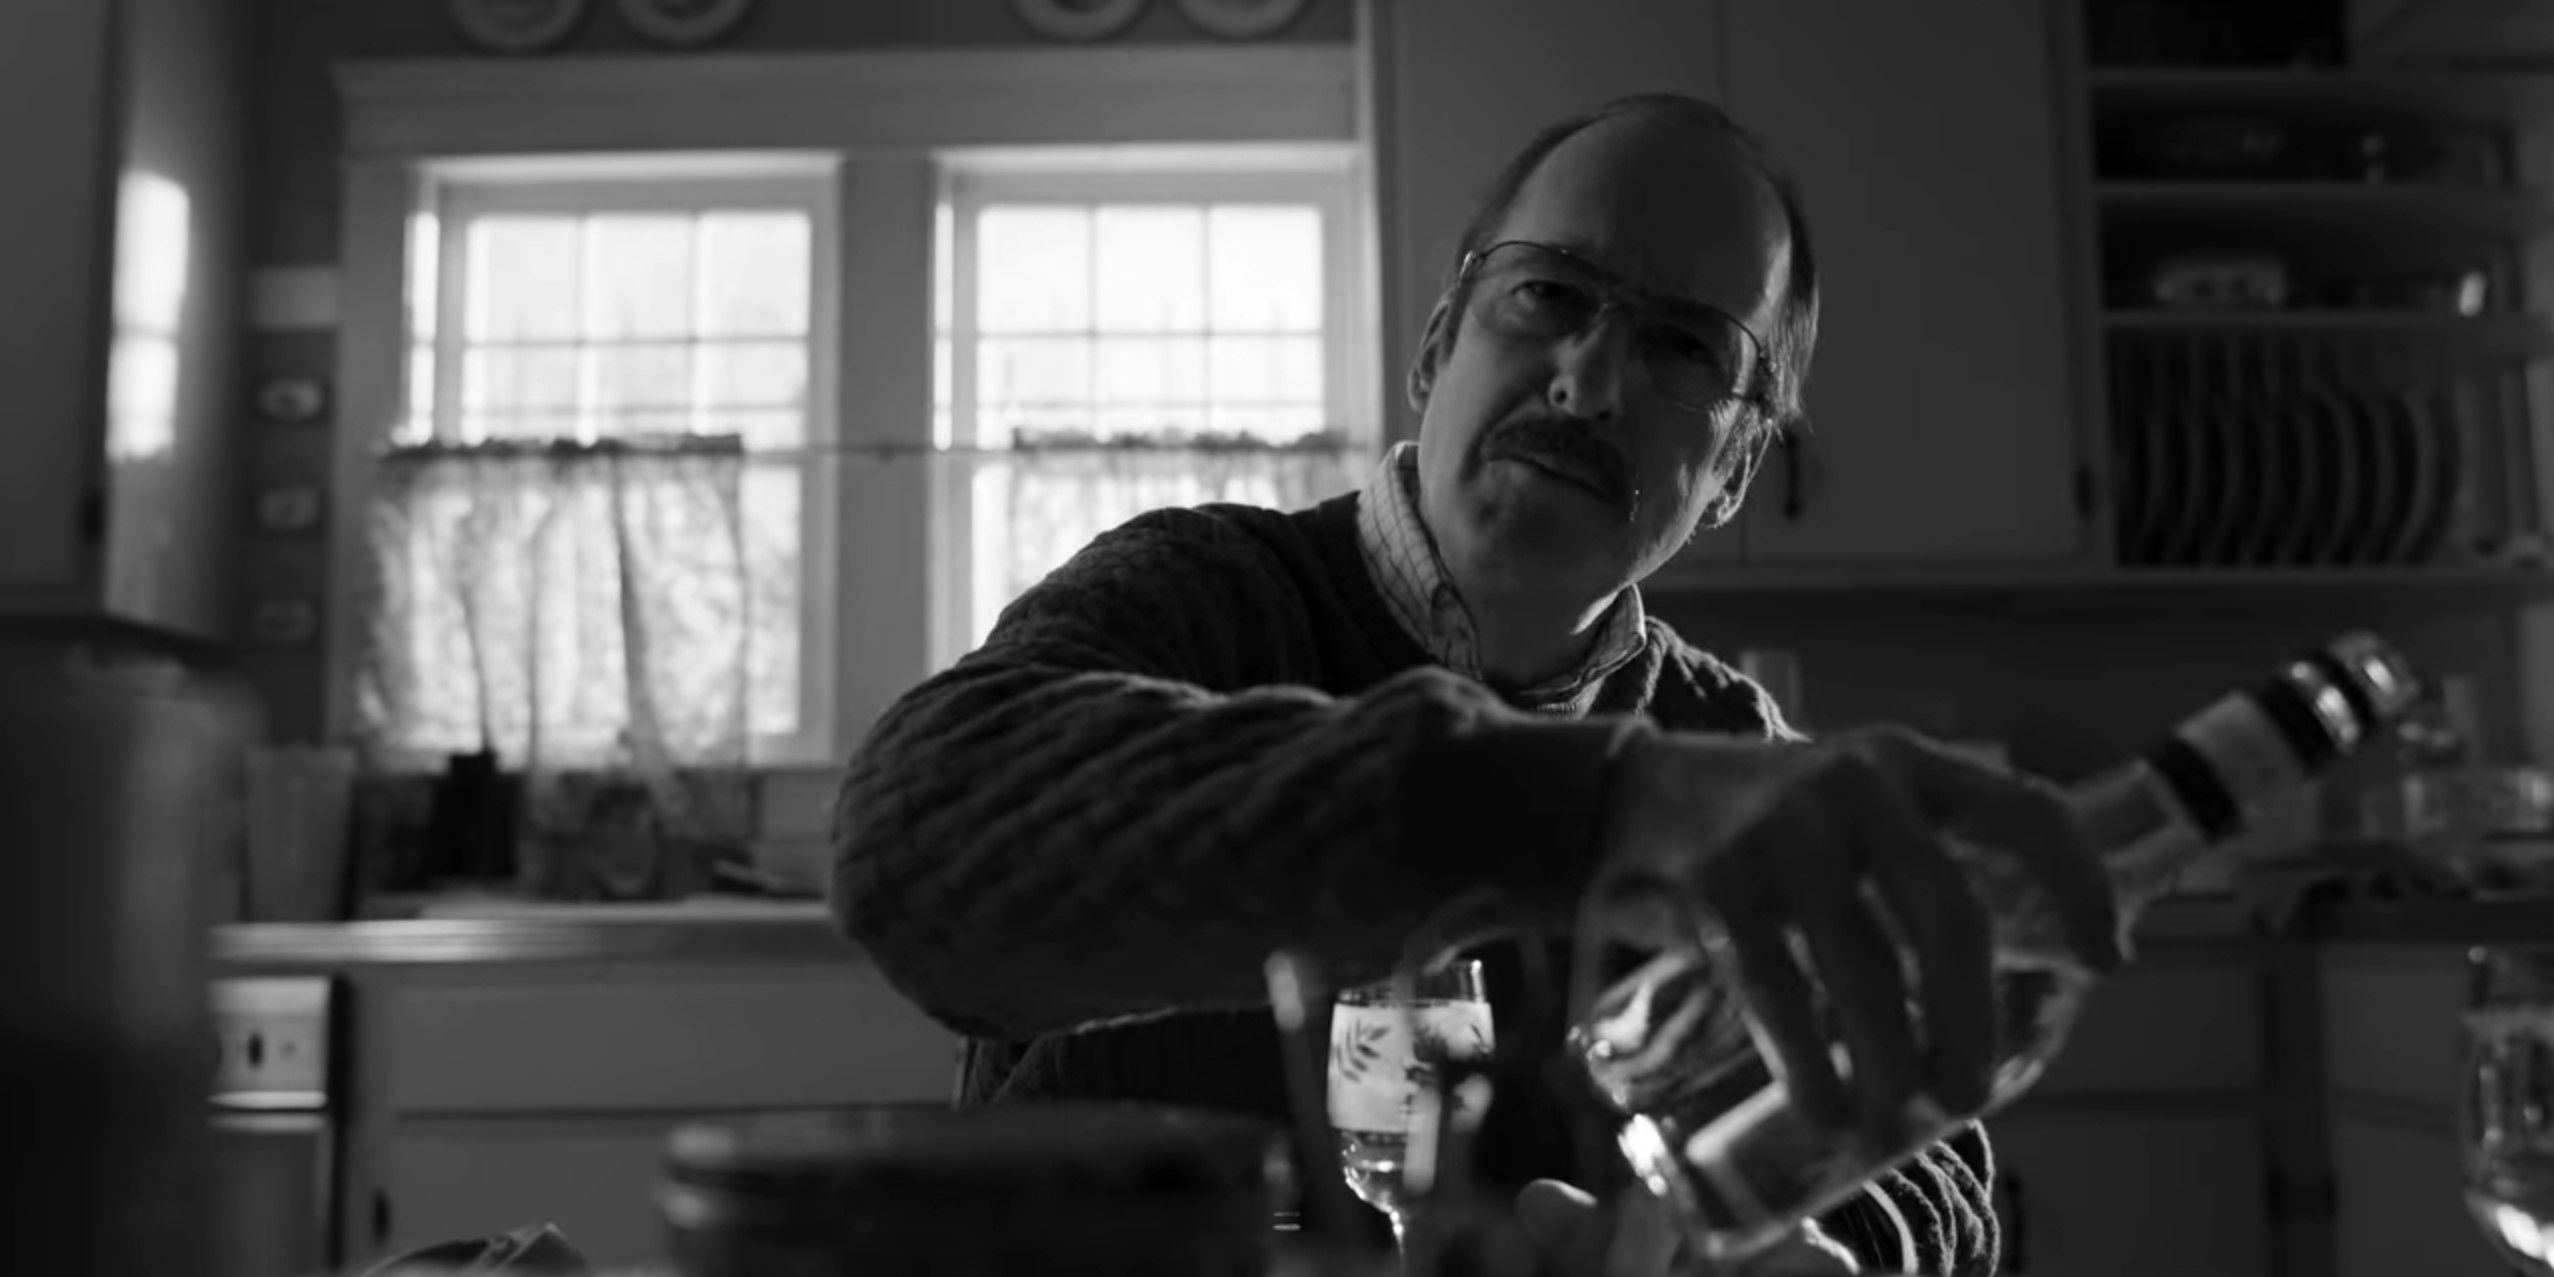 Bob Odenkirk as Gene Takovic pouring drink in Better Call Saul